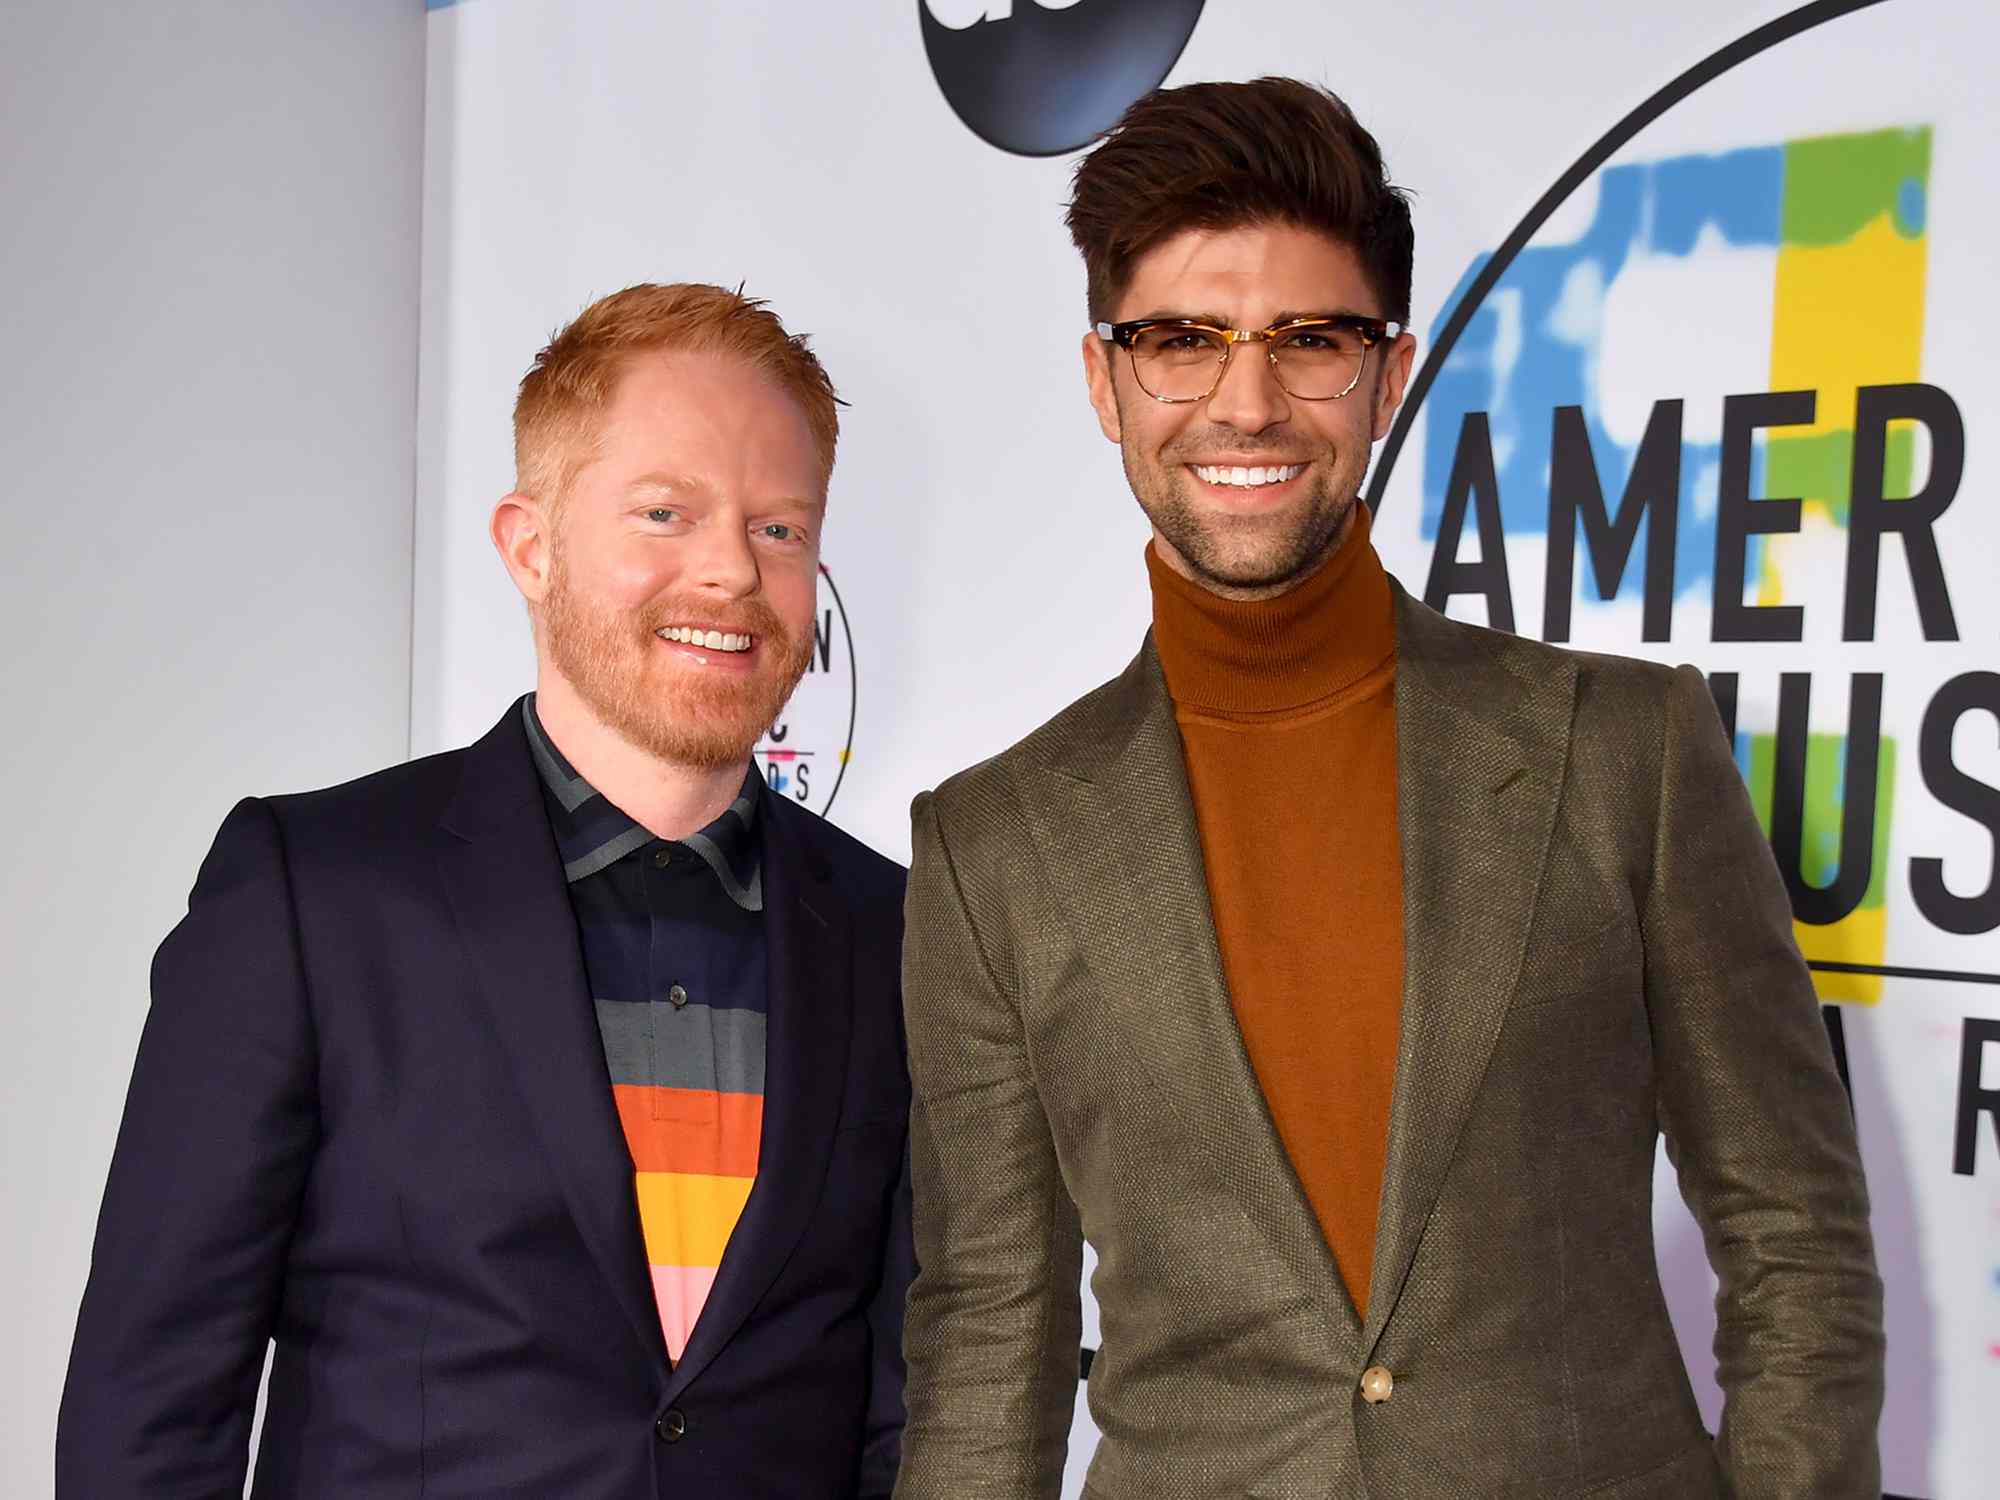 Jesse Tyler Ferguson (L) and Justin Mikita attends the 2017 American Music Awards at Microsoft Theater on November 19, 2017 in Los Angeles, California